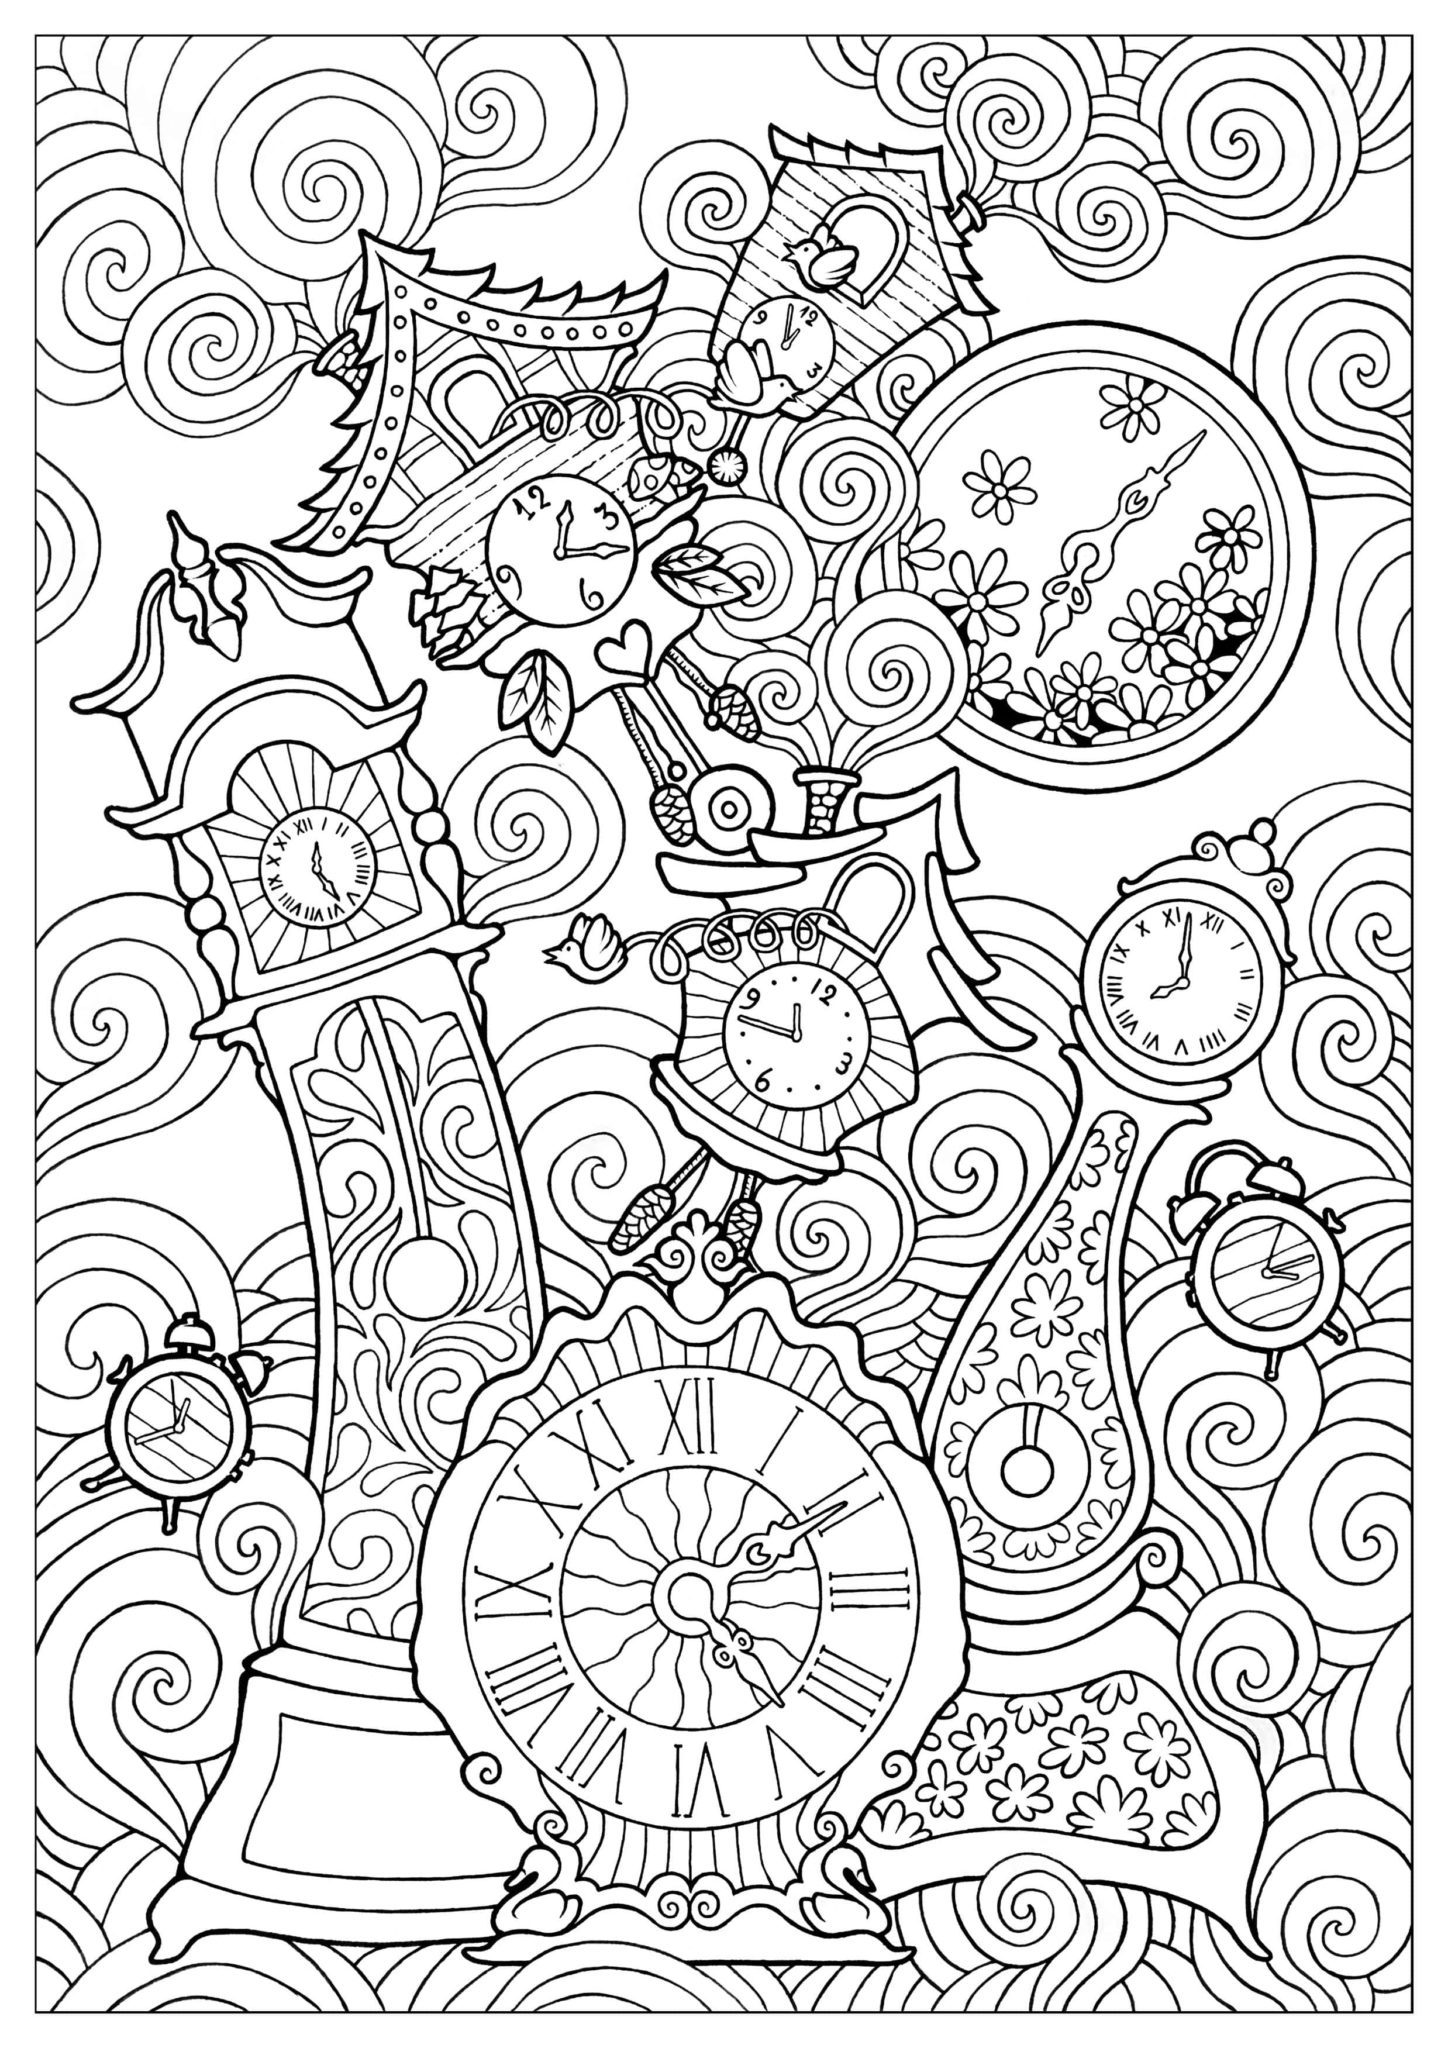 free online coloring pages for adults | coloring pages for adults easy | easy coloring pages for seniors